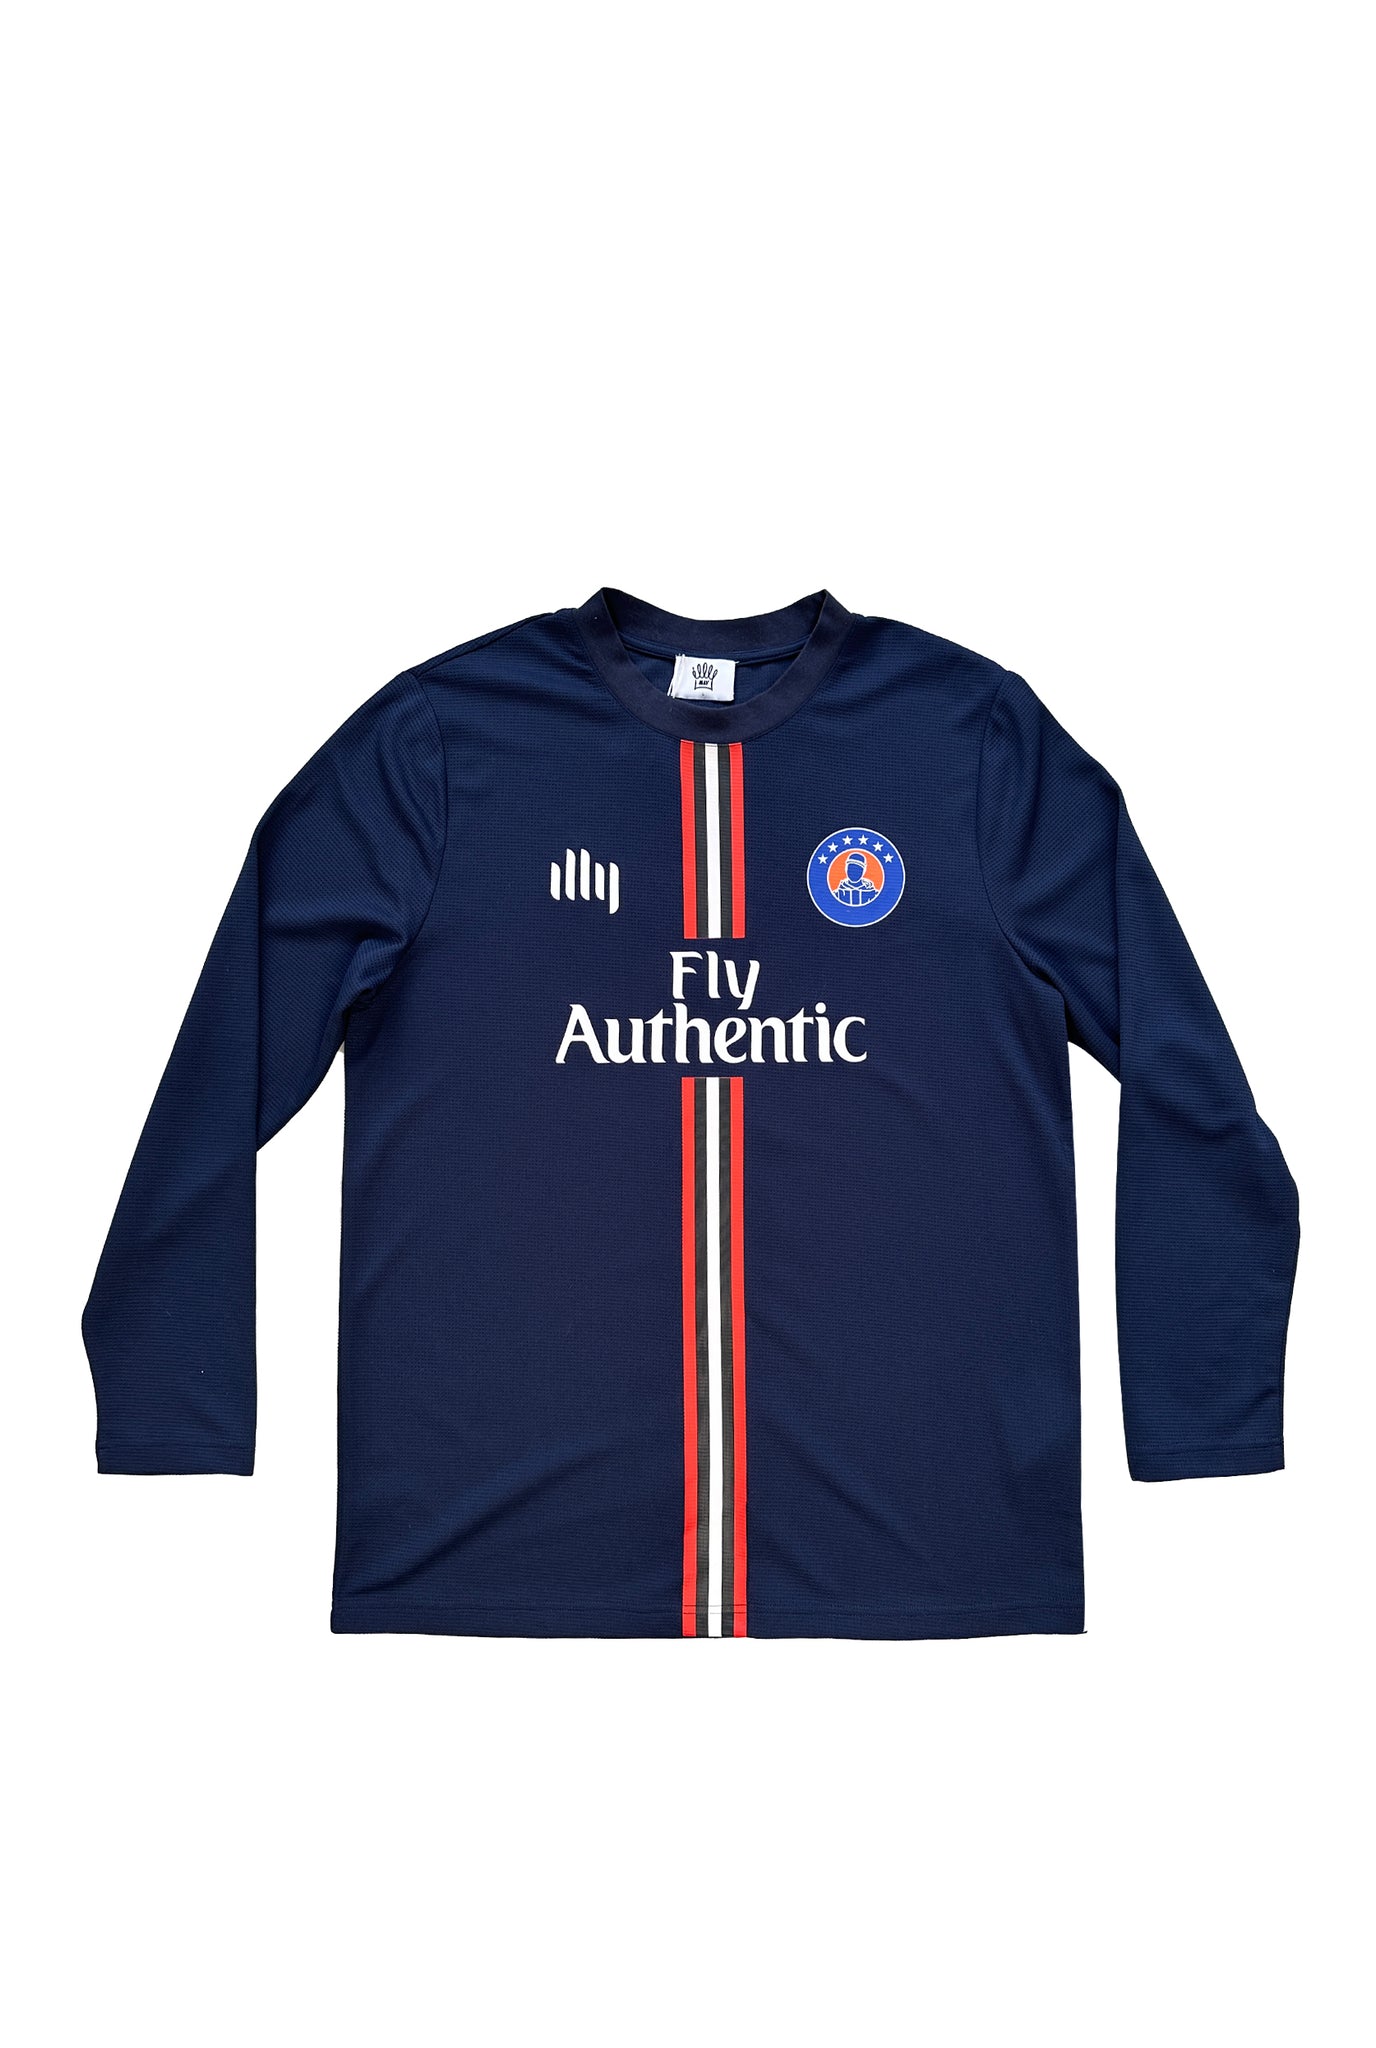 ILLY LS JERSEY IN NAVY